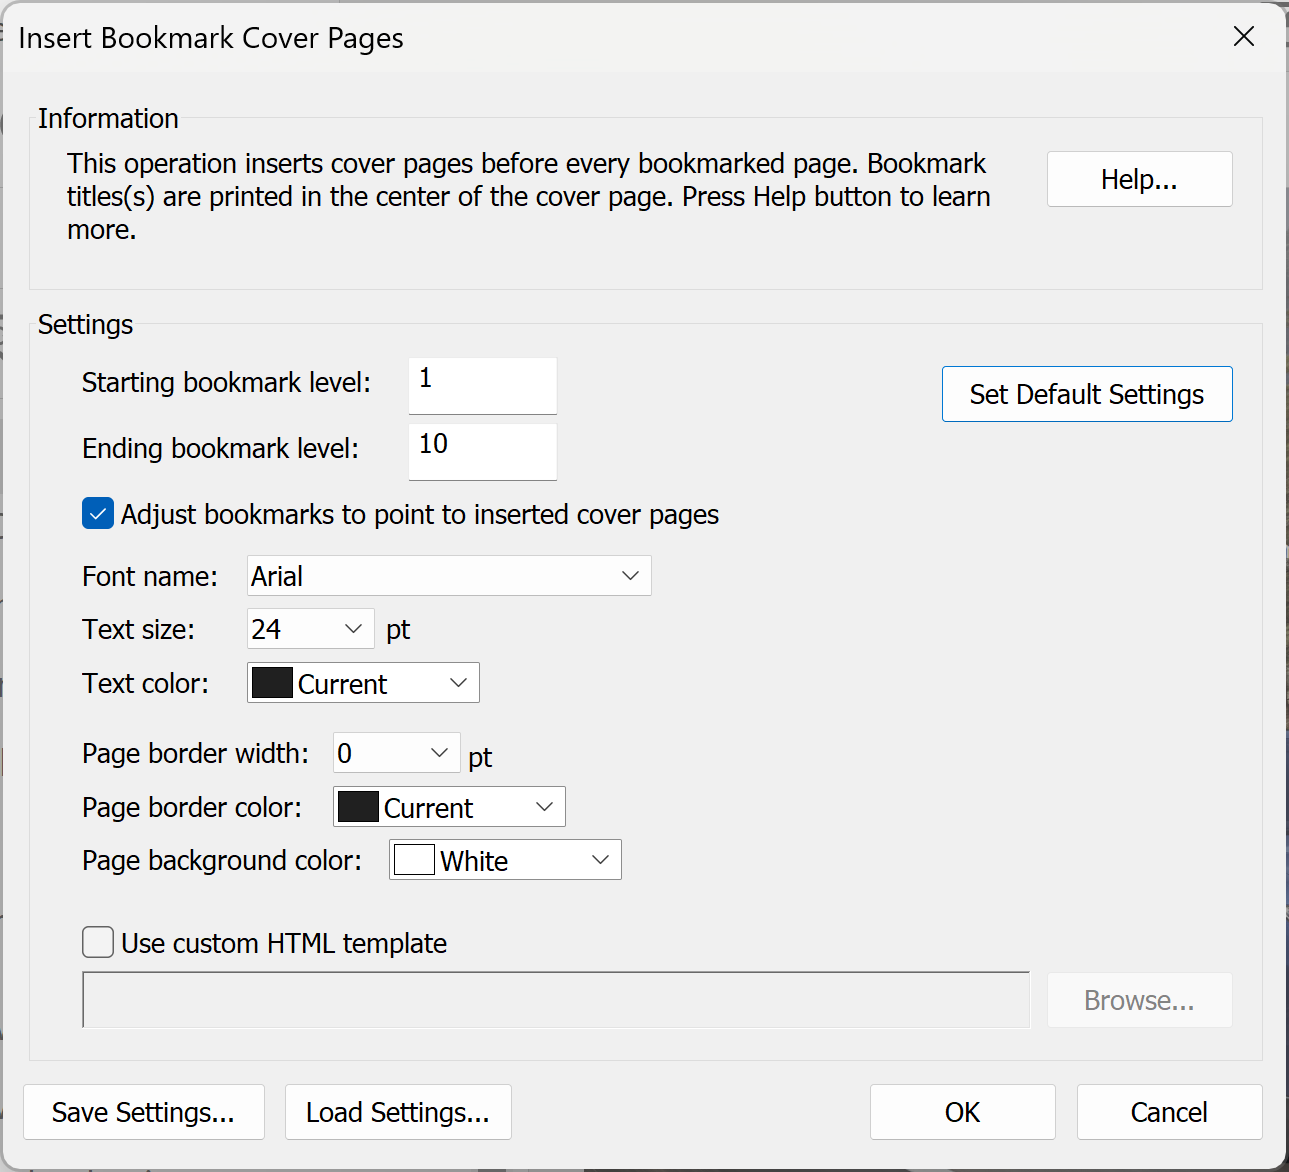 Insert Bookmark Cover Pages Dialog Screen